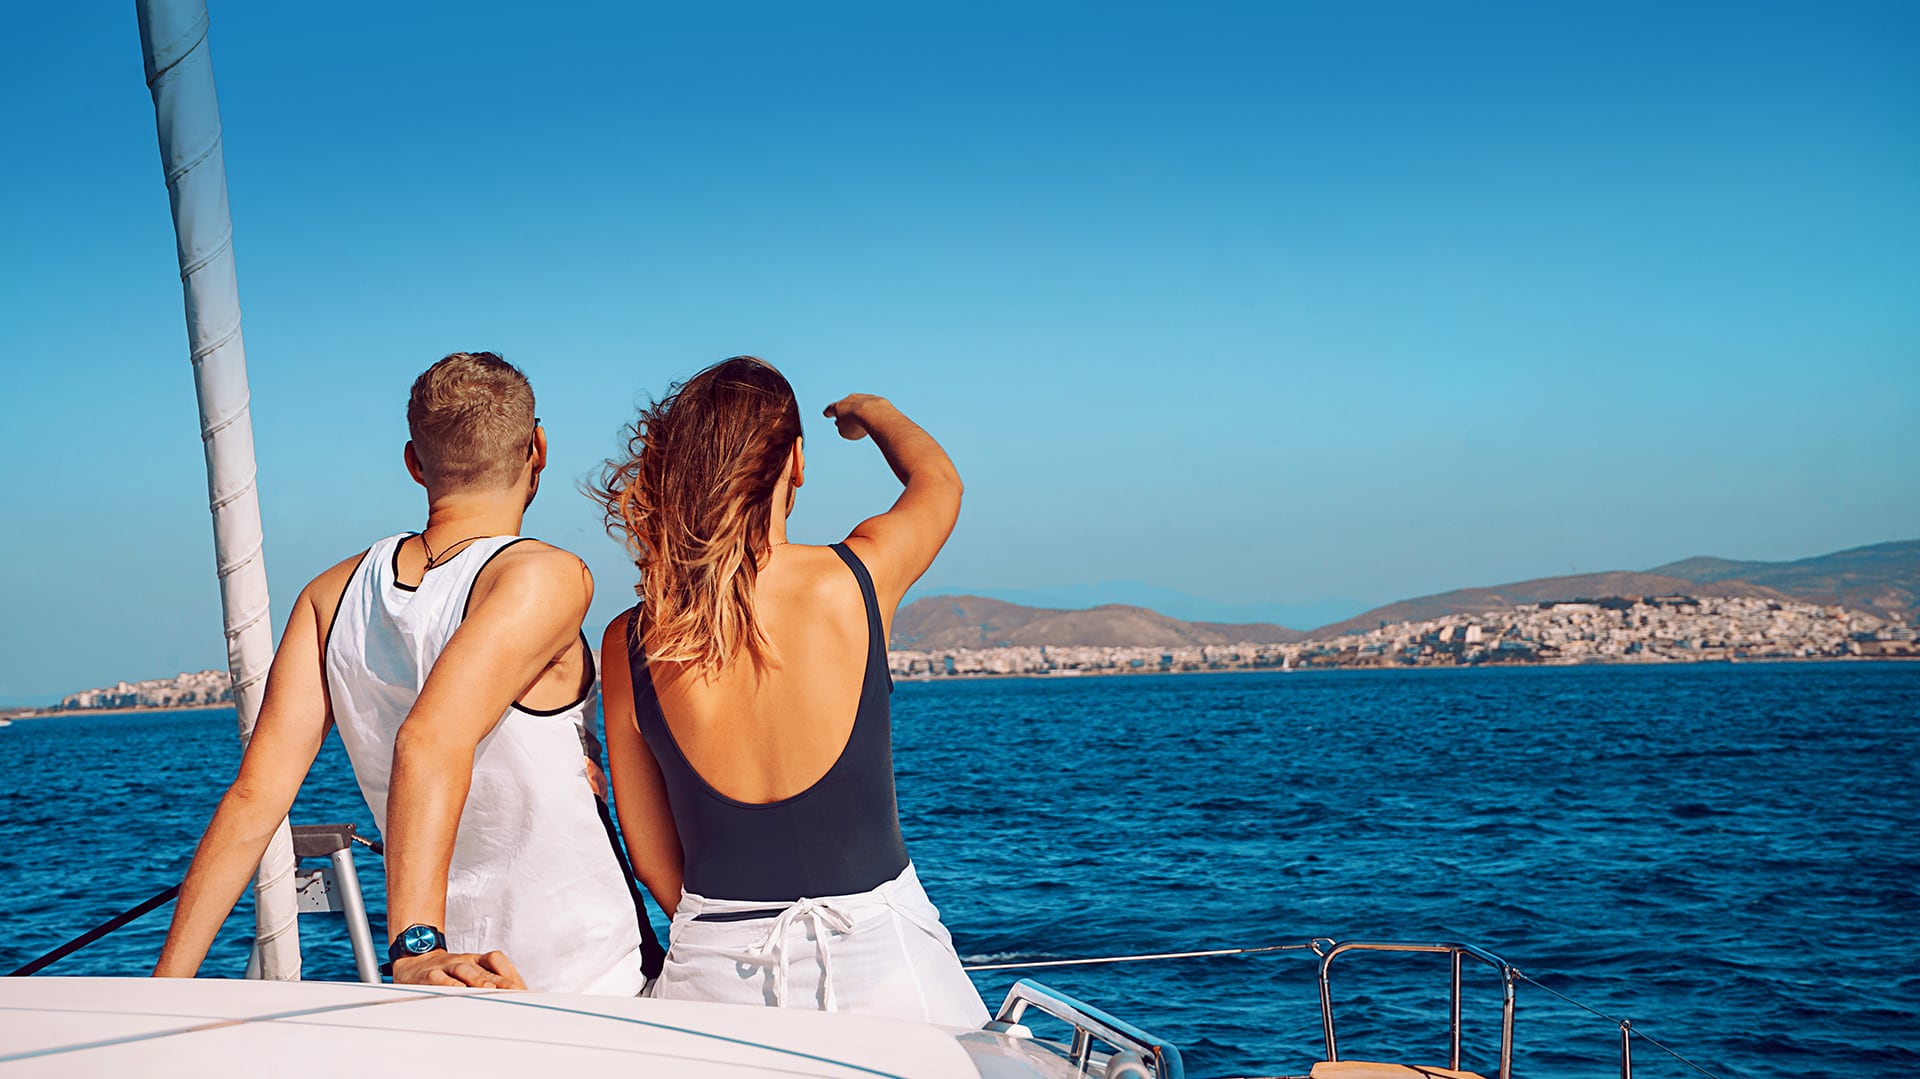  	 	   		Athens Riviera Day Cruise 		 		  A must experience for your bucket list. Explore more 		 	    	  		 		 Book now 	 	   	  			 		  		 			  		Full dayall inclusive 		 		   		 		  		 			  		max12 persons 		 		    		 		  		 			  		 from€ 2300up to 8 guests		 		     	 	    